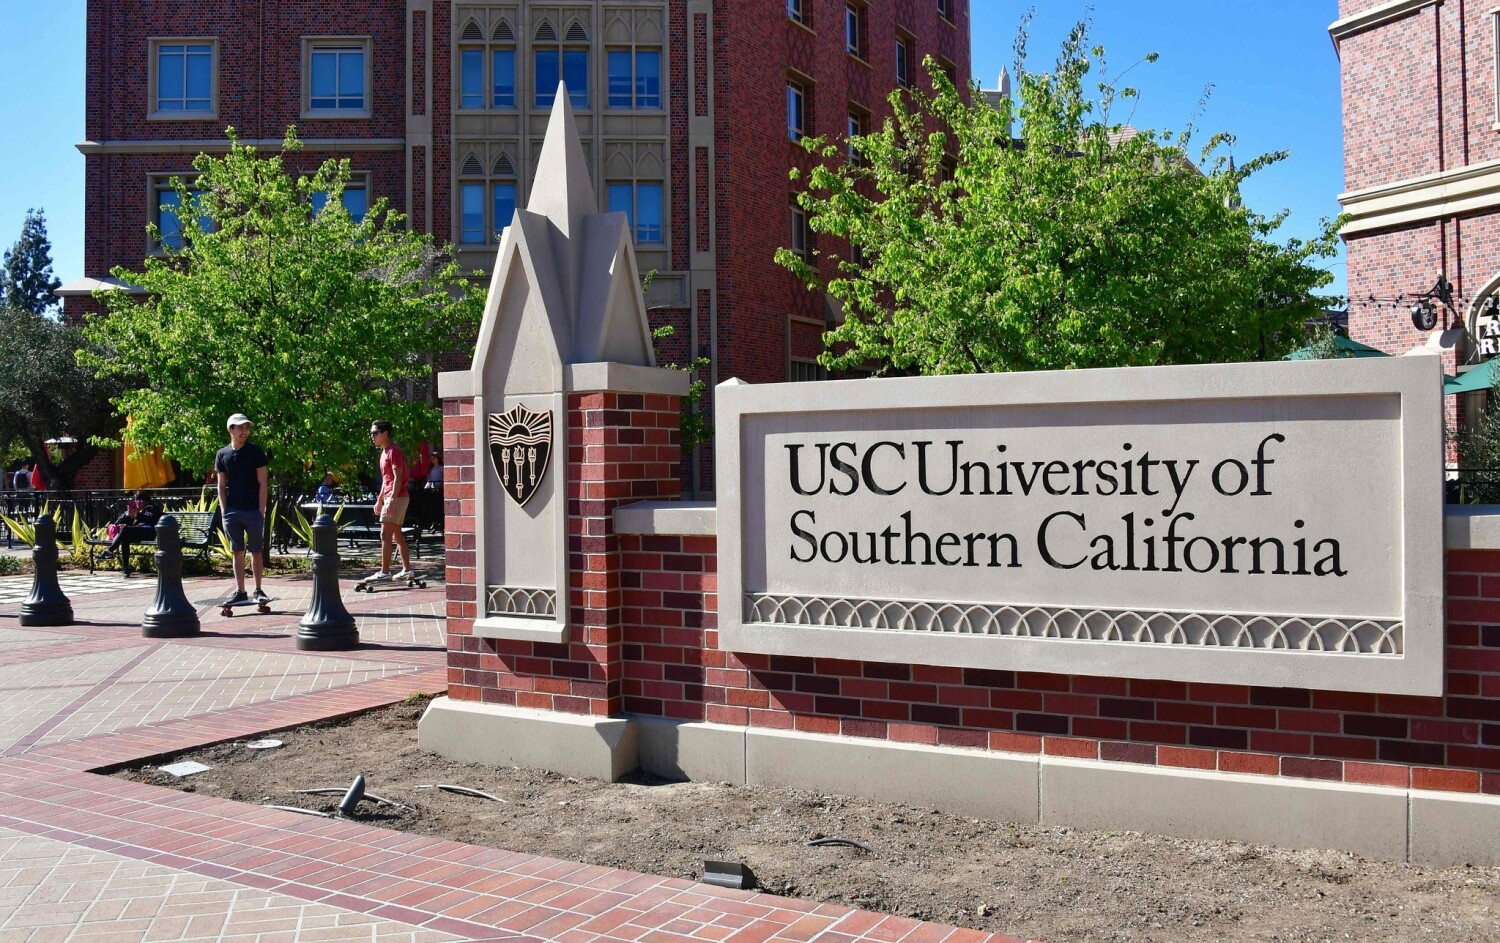 Getting into USC this fall just got easier amid coronavirus uncertainty